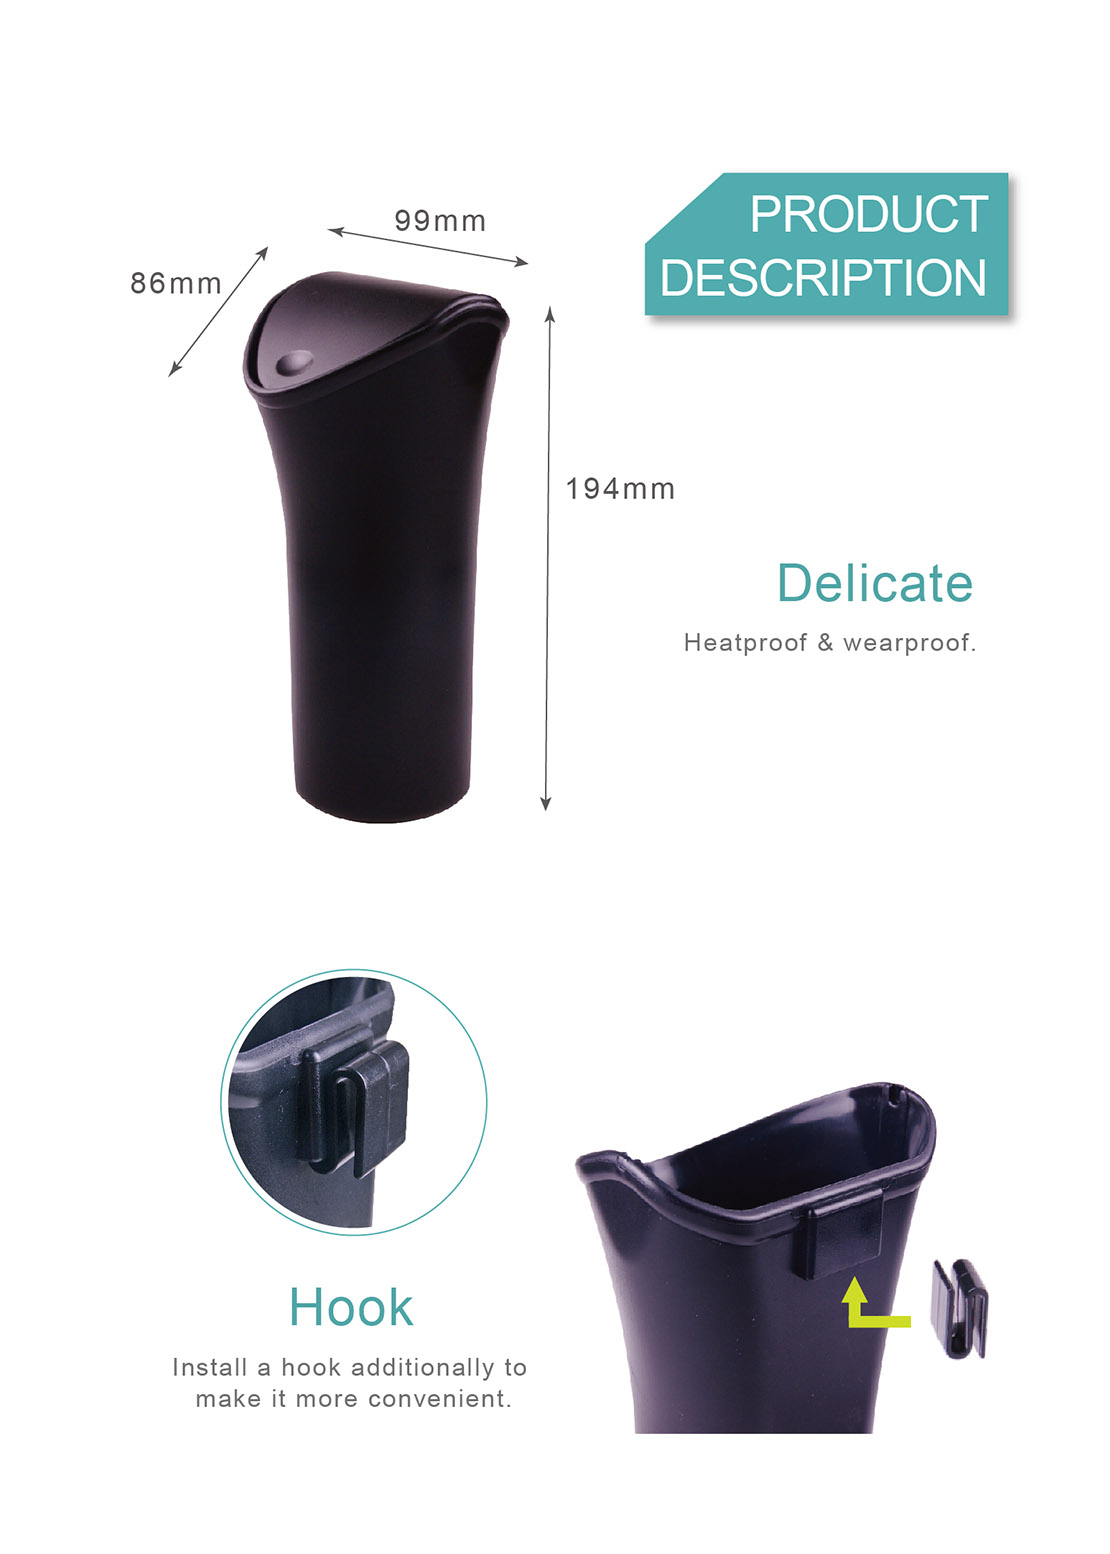 CREATIVE MULTIFUNCTION TRASH CAN HPA560